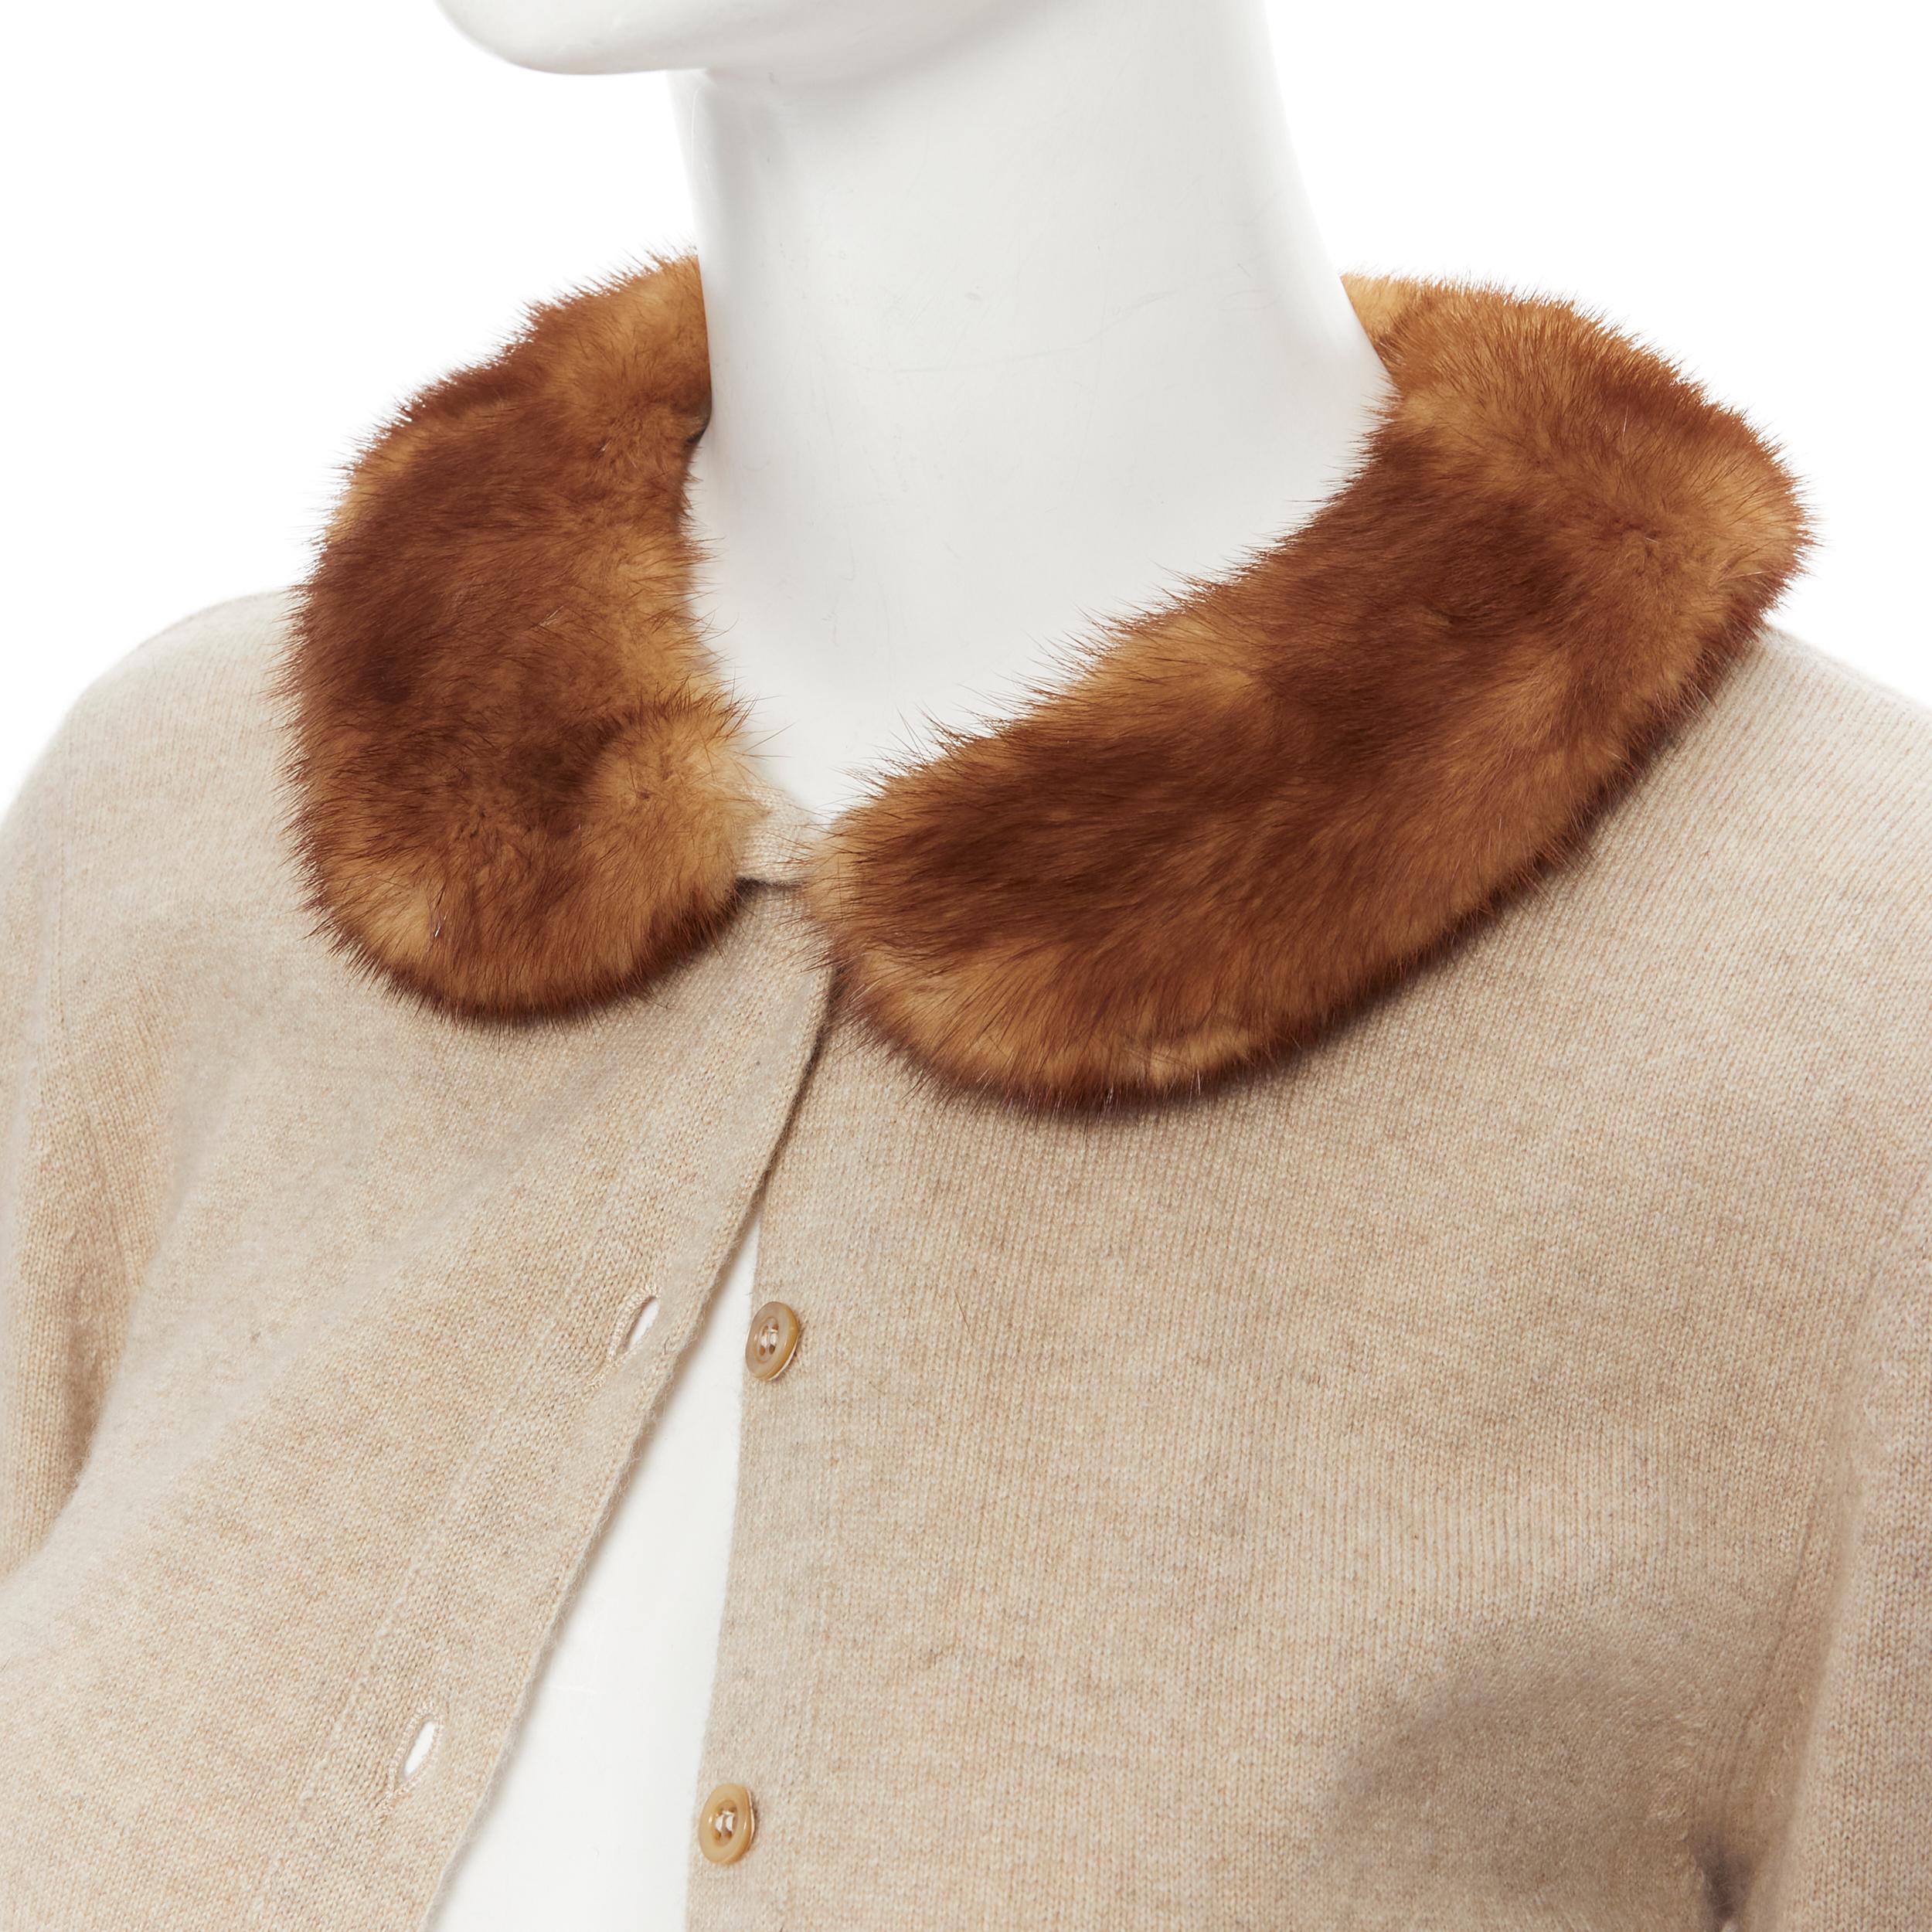 vintage VALENTINO brown mink fur collar 100% cashmere cardigan sweater M Reference: LNKO/A01821 Brand: Valentino Material: Cashmere Color: Brown Pattern: Solid Closure: Button Extra Detail: Genuine mink fur collar. Patch pocket. 100% cashmere